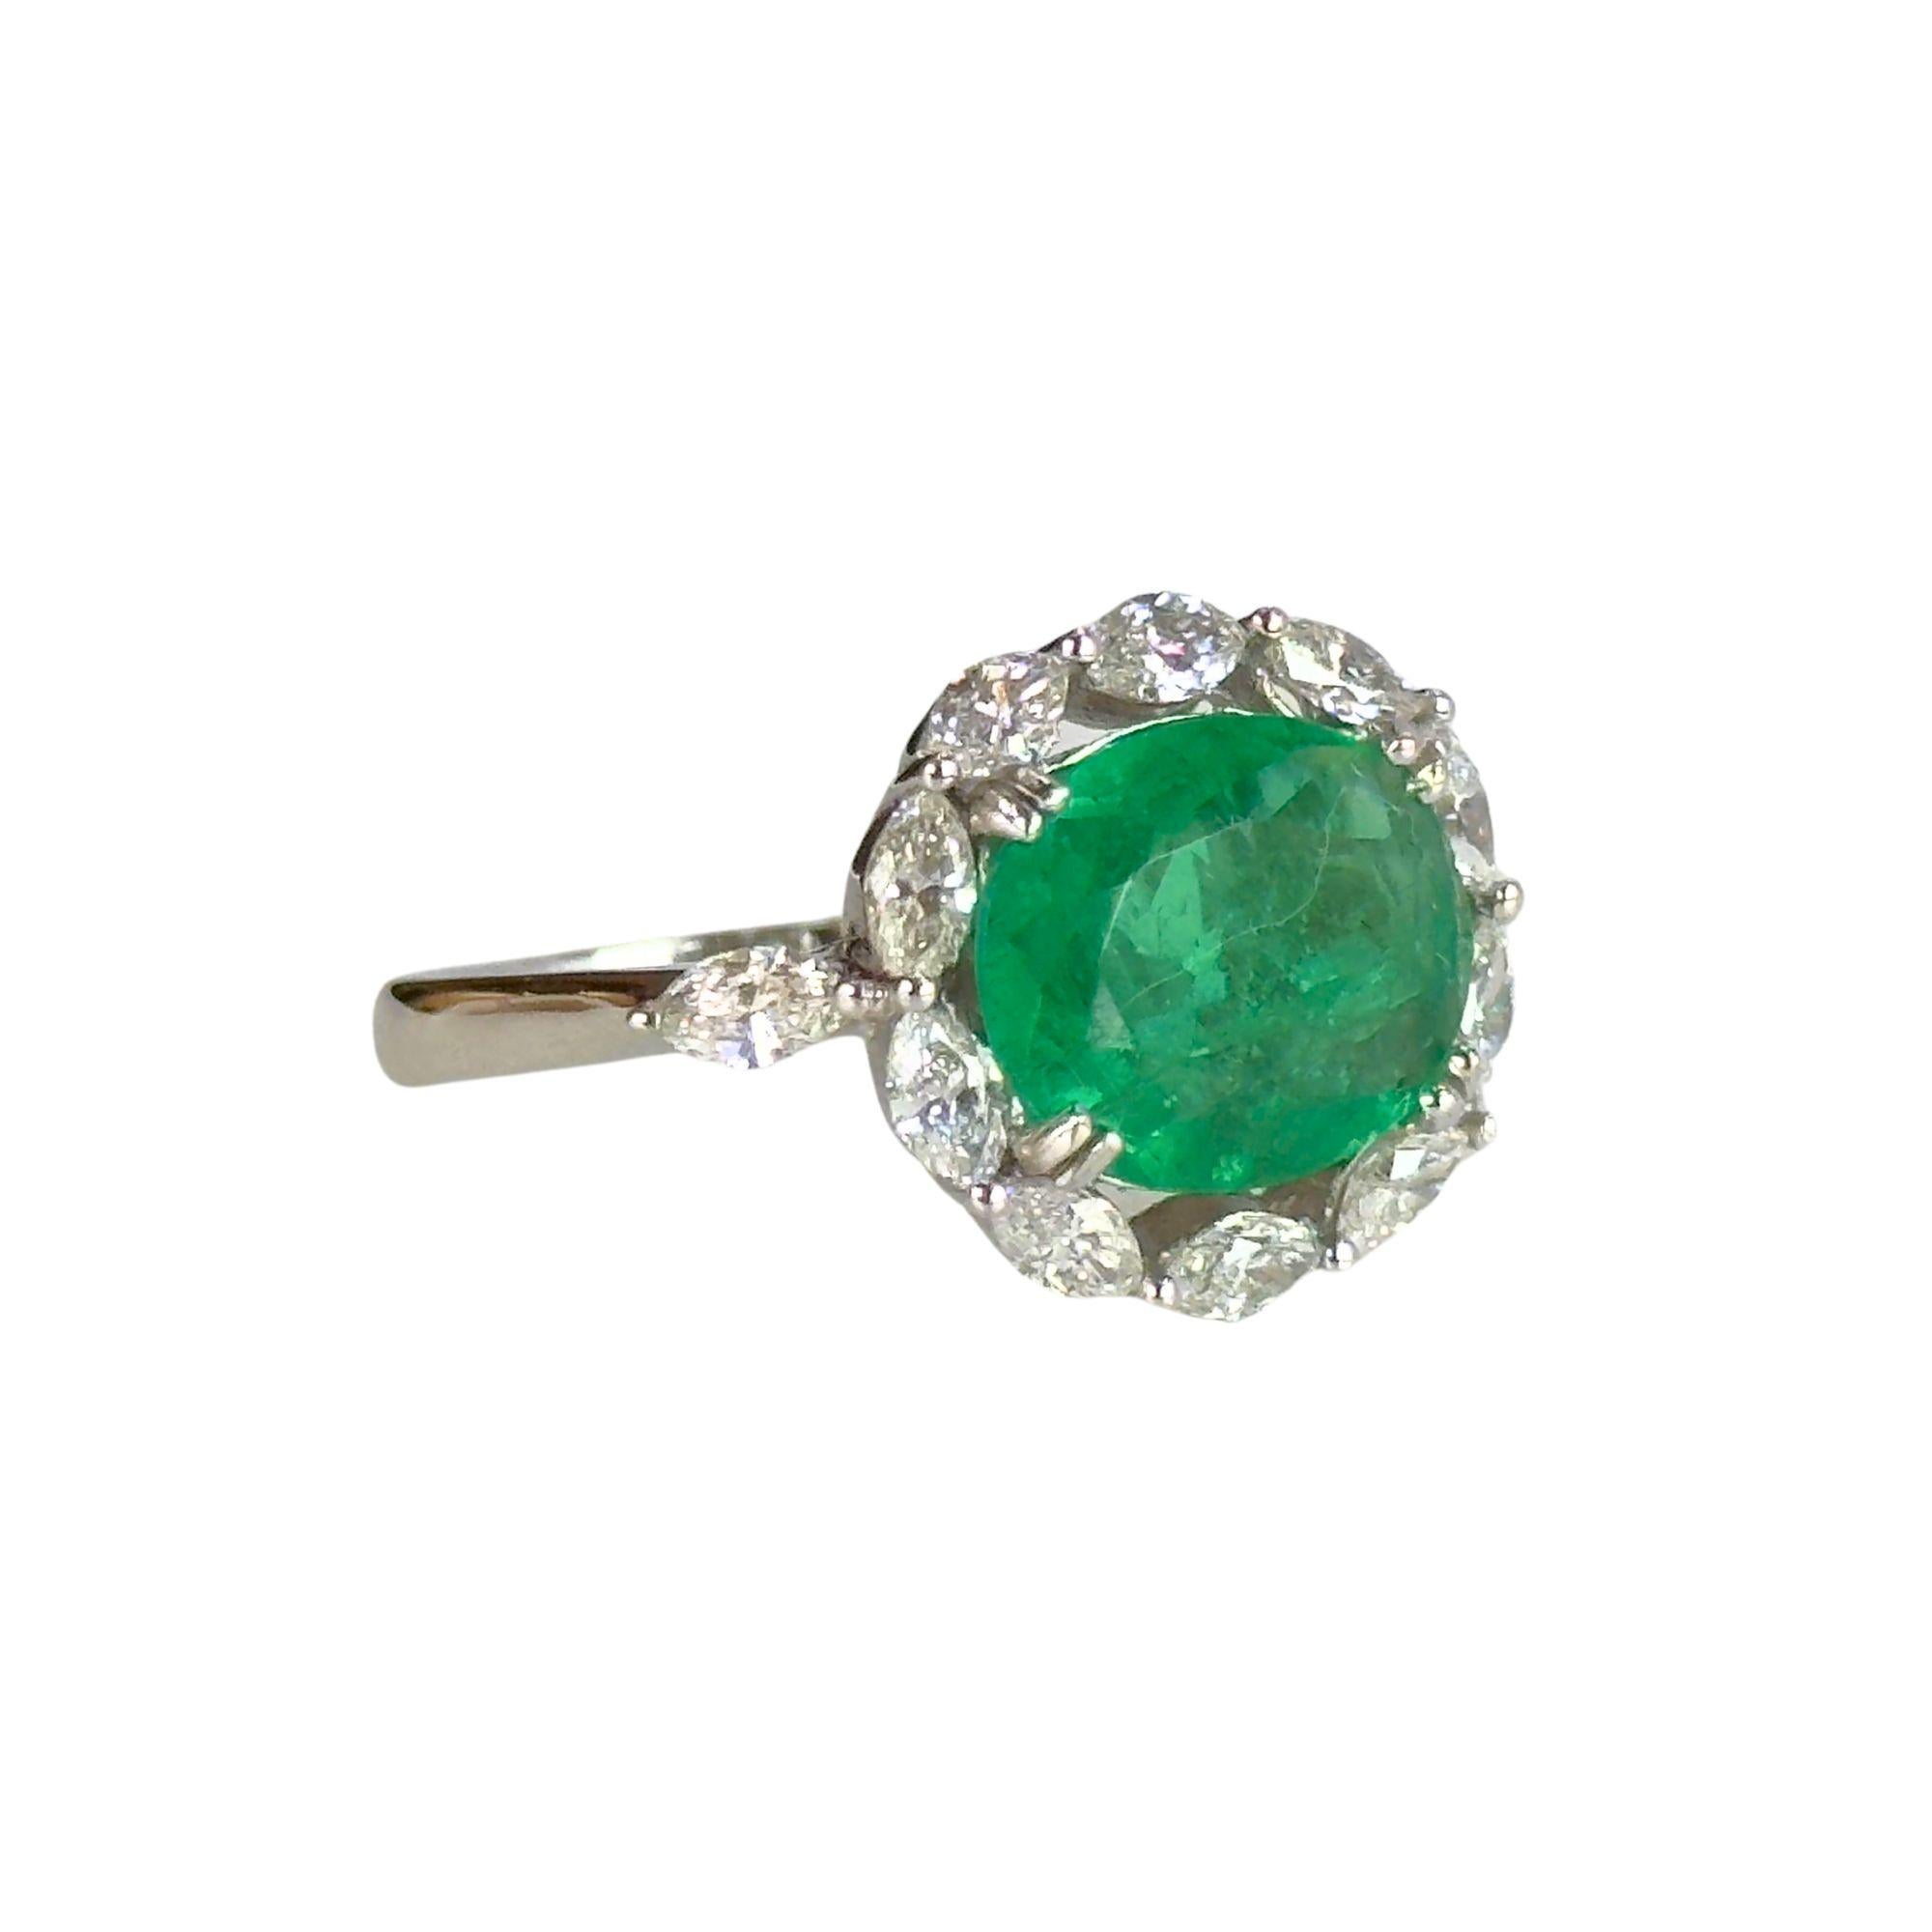 This exquisite 18k white gold ring features a stunning 2.37 carat emerald surrounded by 0.93 carats of sparkling diamonds. With a weight of 5.28 grams and a ring size of 6.5, this luxurious piece balances elegance and boldness, making it the perfect